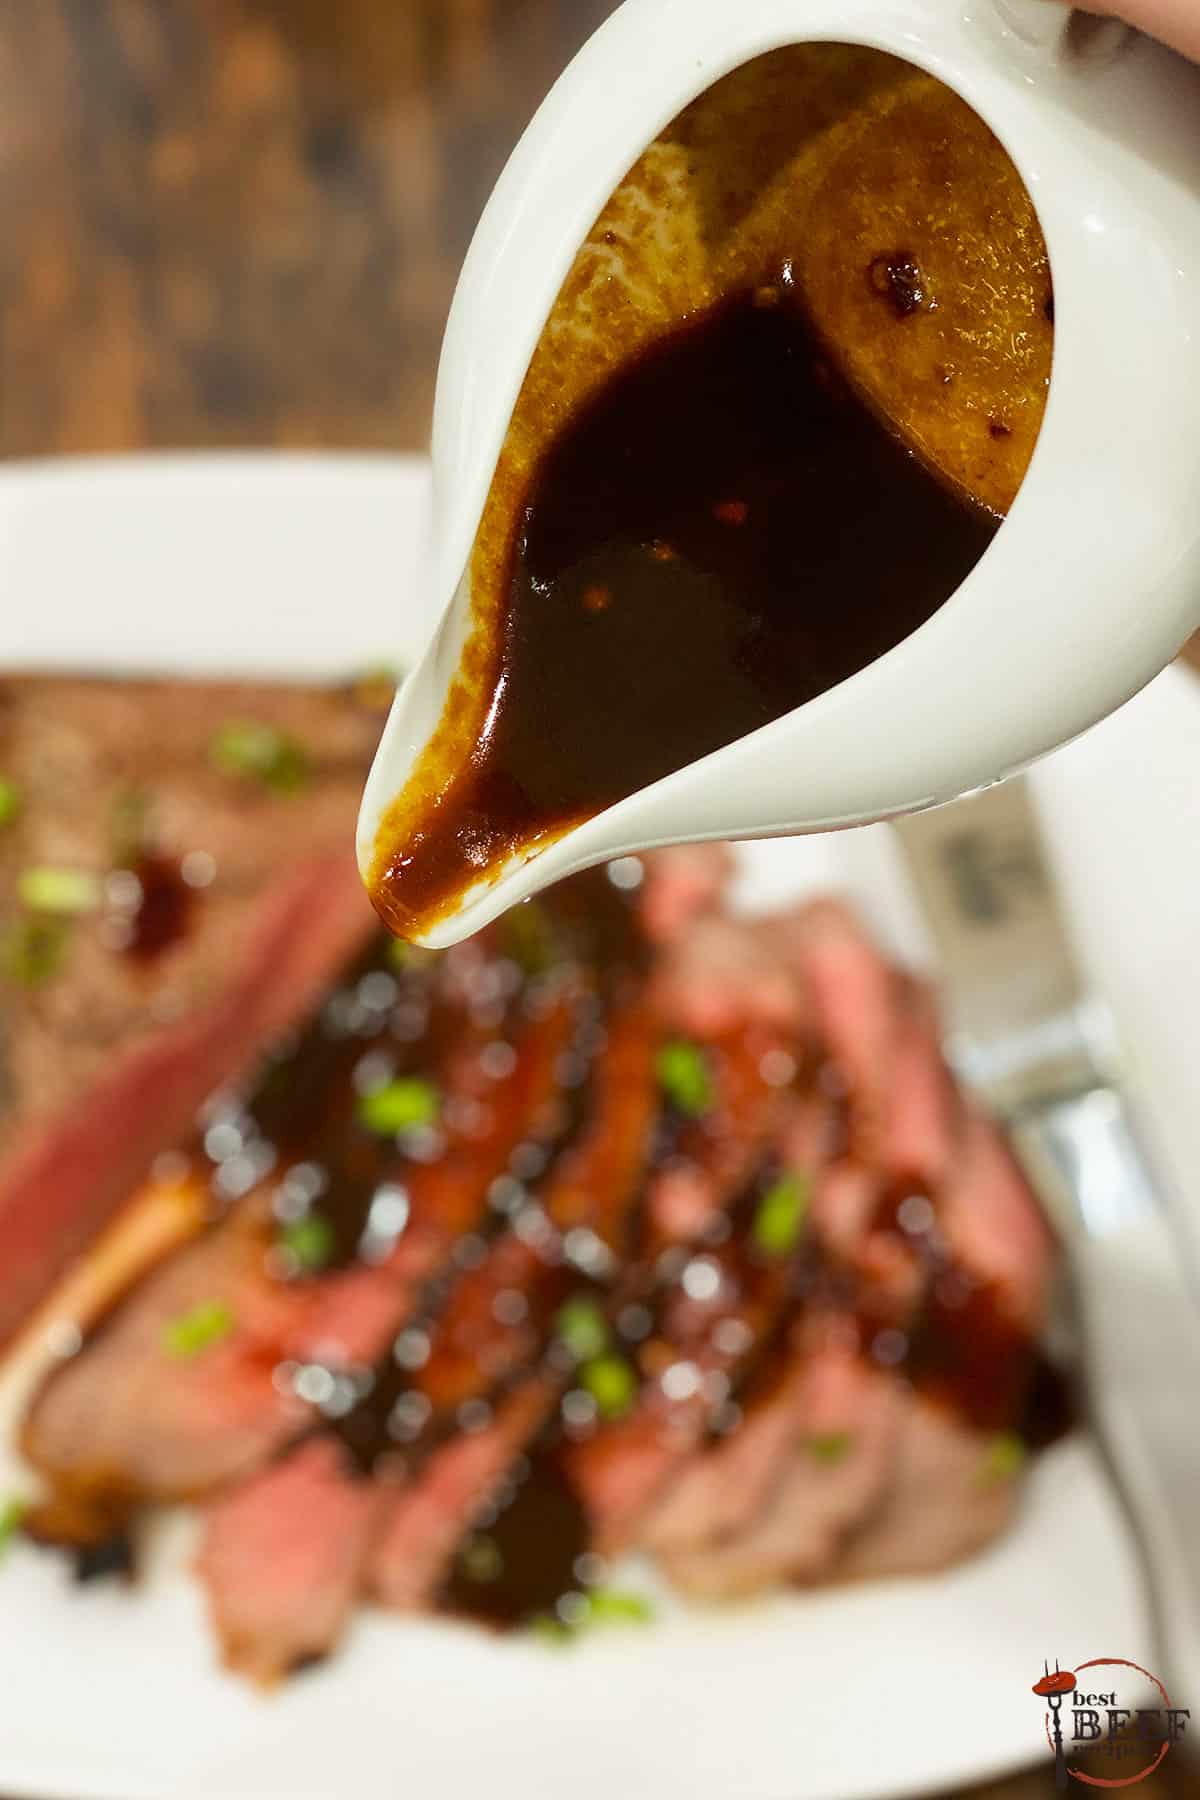 London broil marinade sauce in a white dish ready to pour over steak